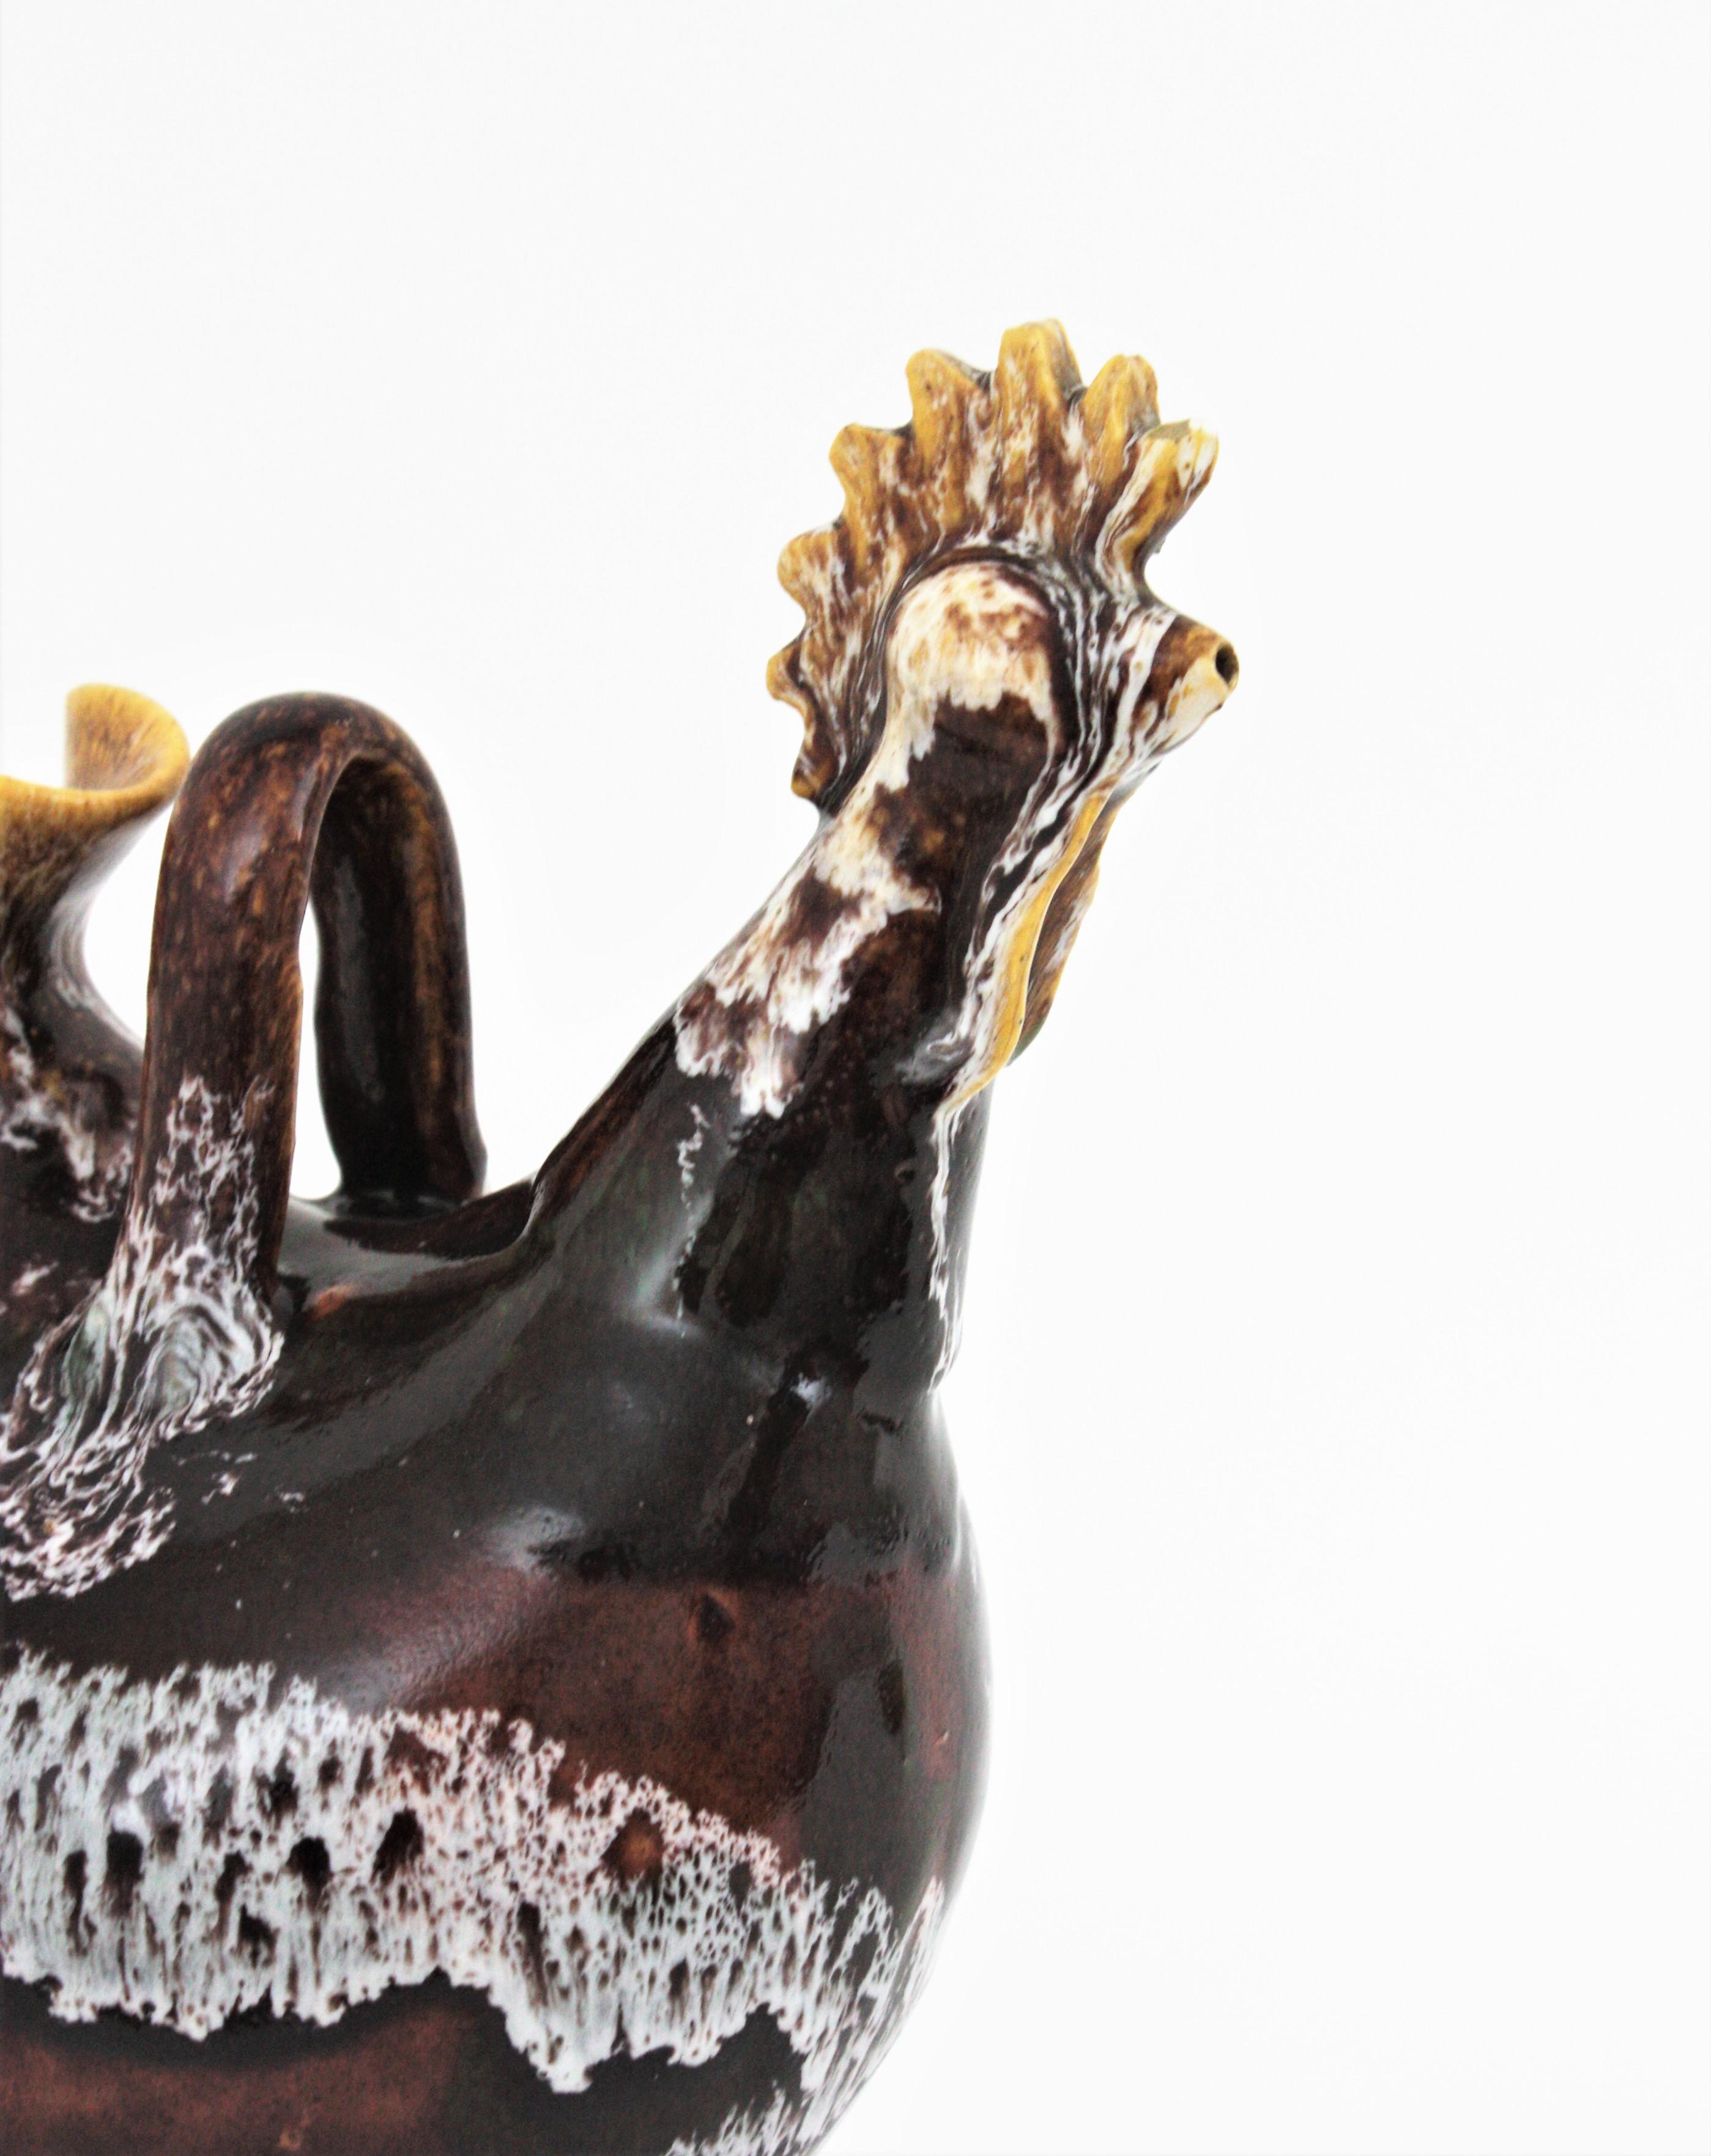 Spanish Rooster Shaped Pitcher in Brown Glazed Ceramic, 1960s For Sale 2